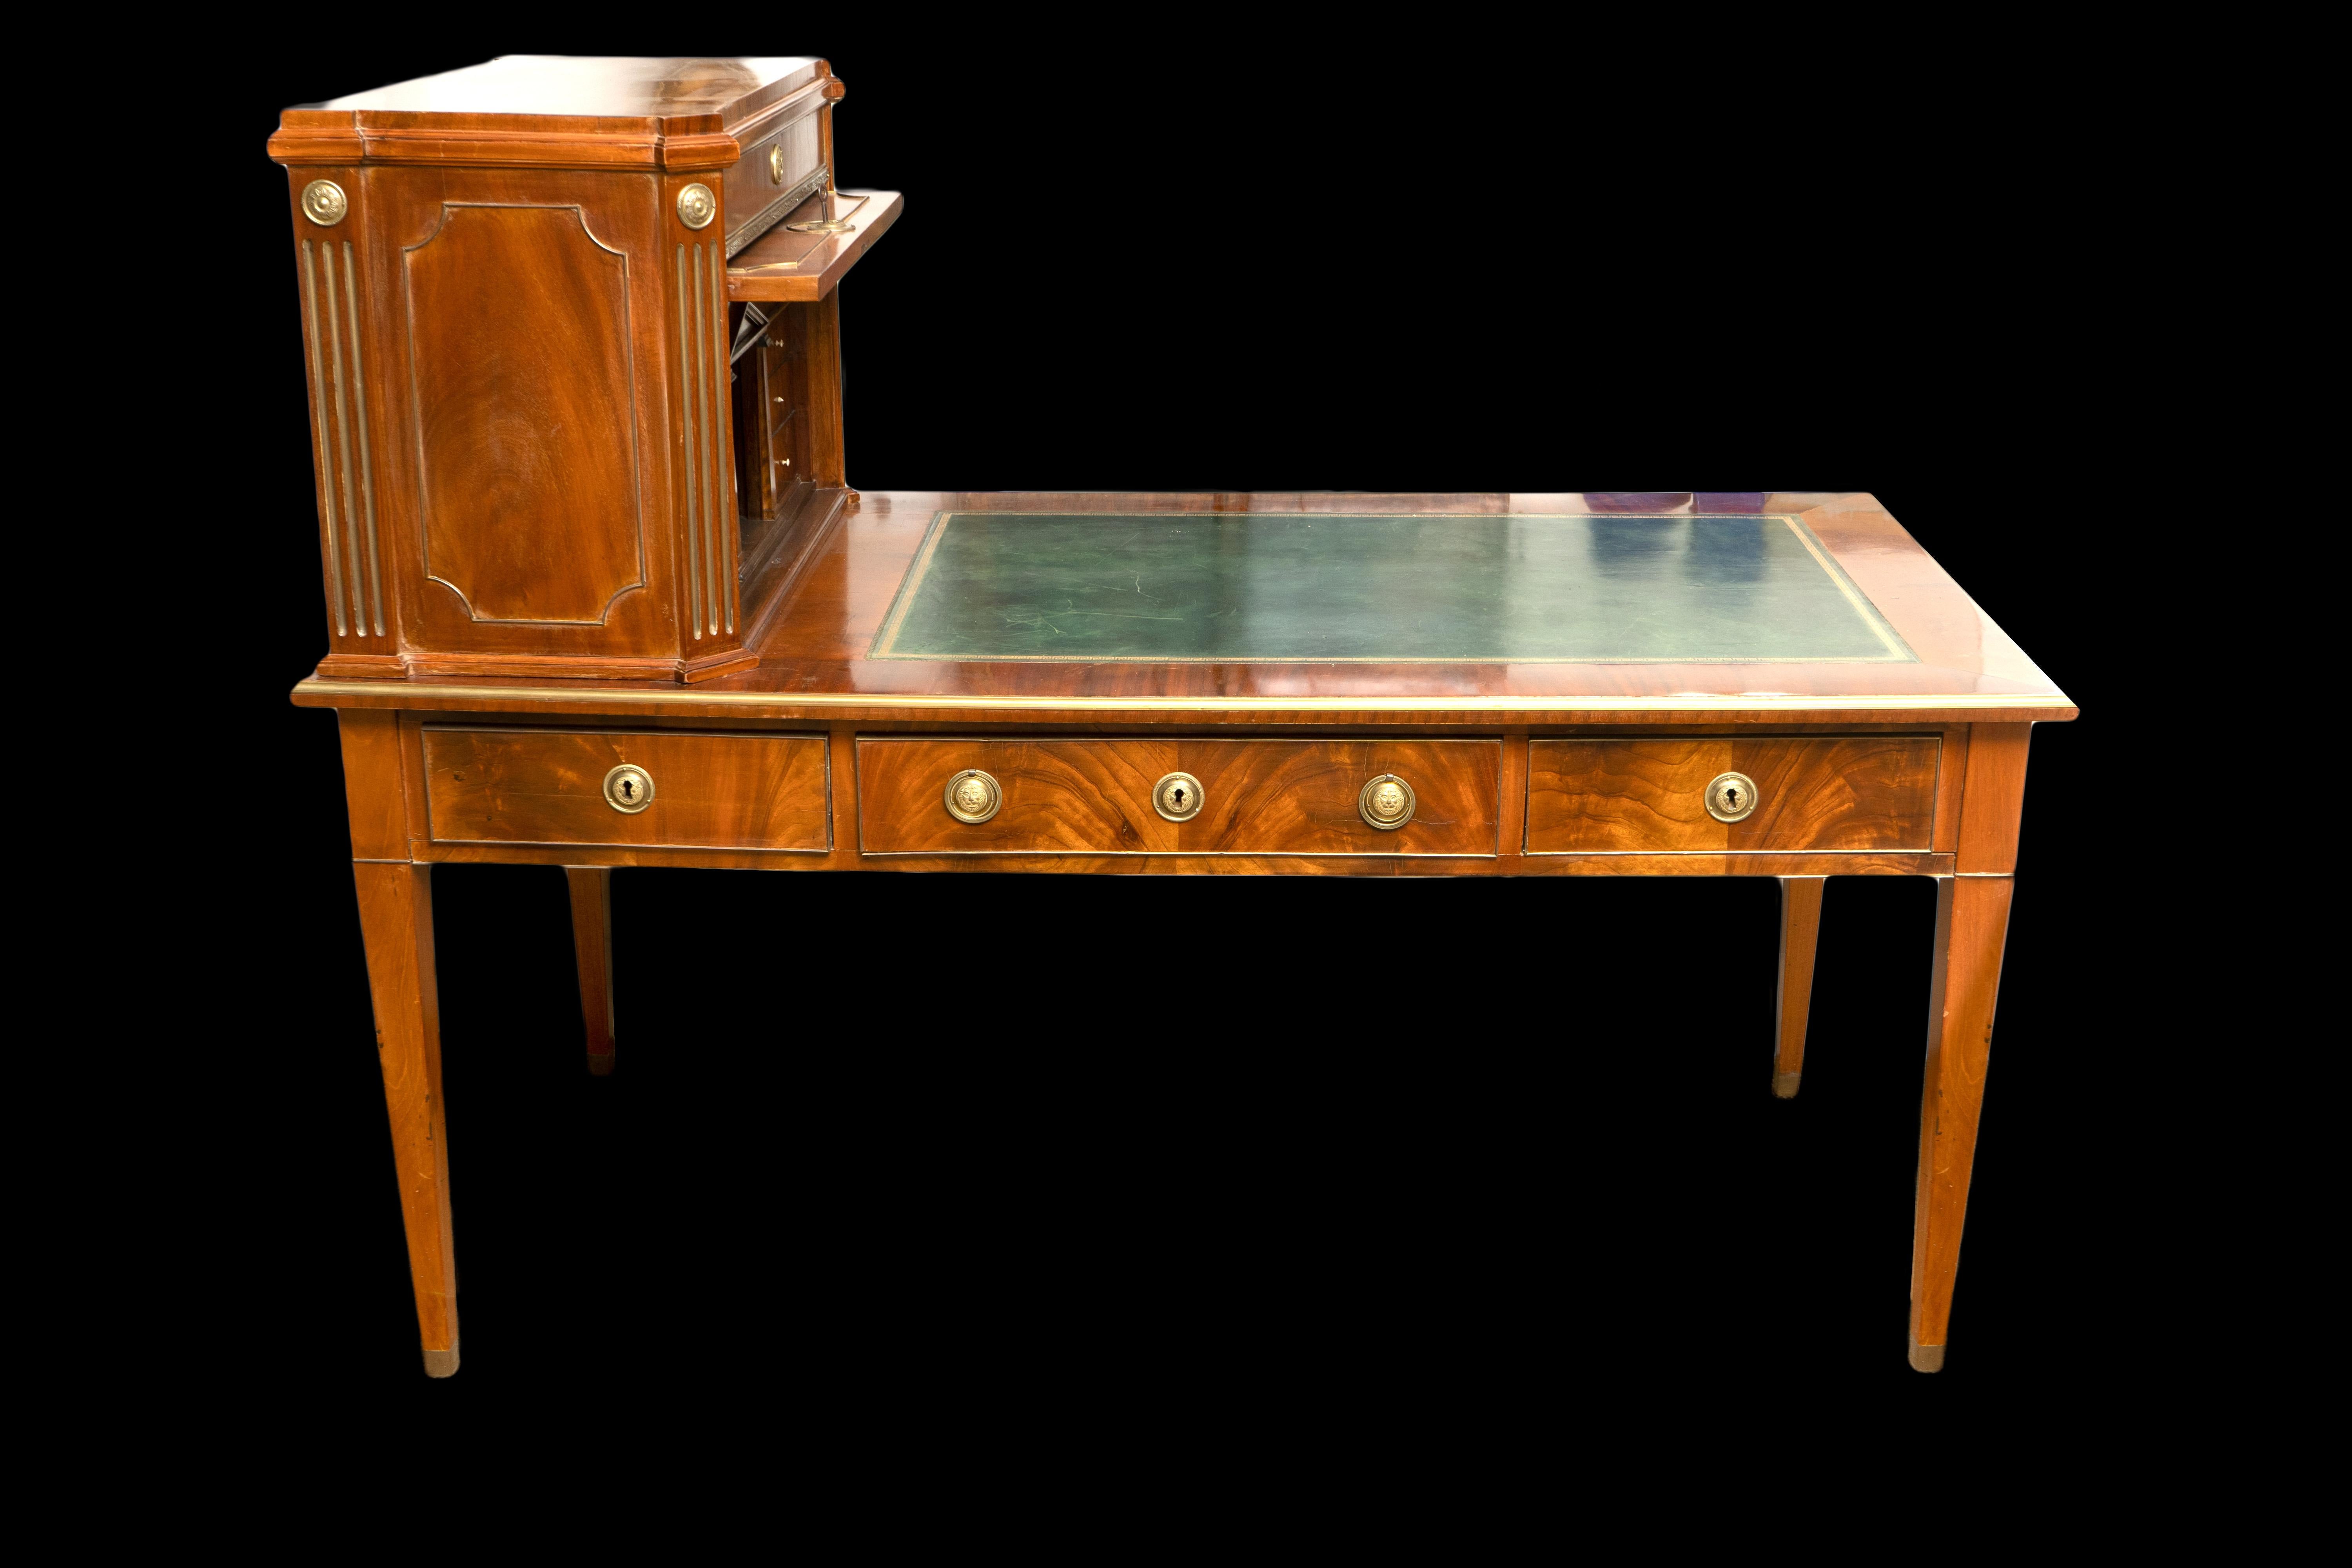 This exquisite writing desk is a true masterpiece of nineteenth century craftsmanship. The desk is constructed of richly grained mahogany and is embellished with exquisite bronze mounts, adding a touch of elegance to its classic design. The desk is